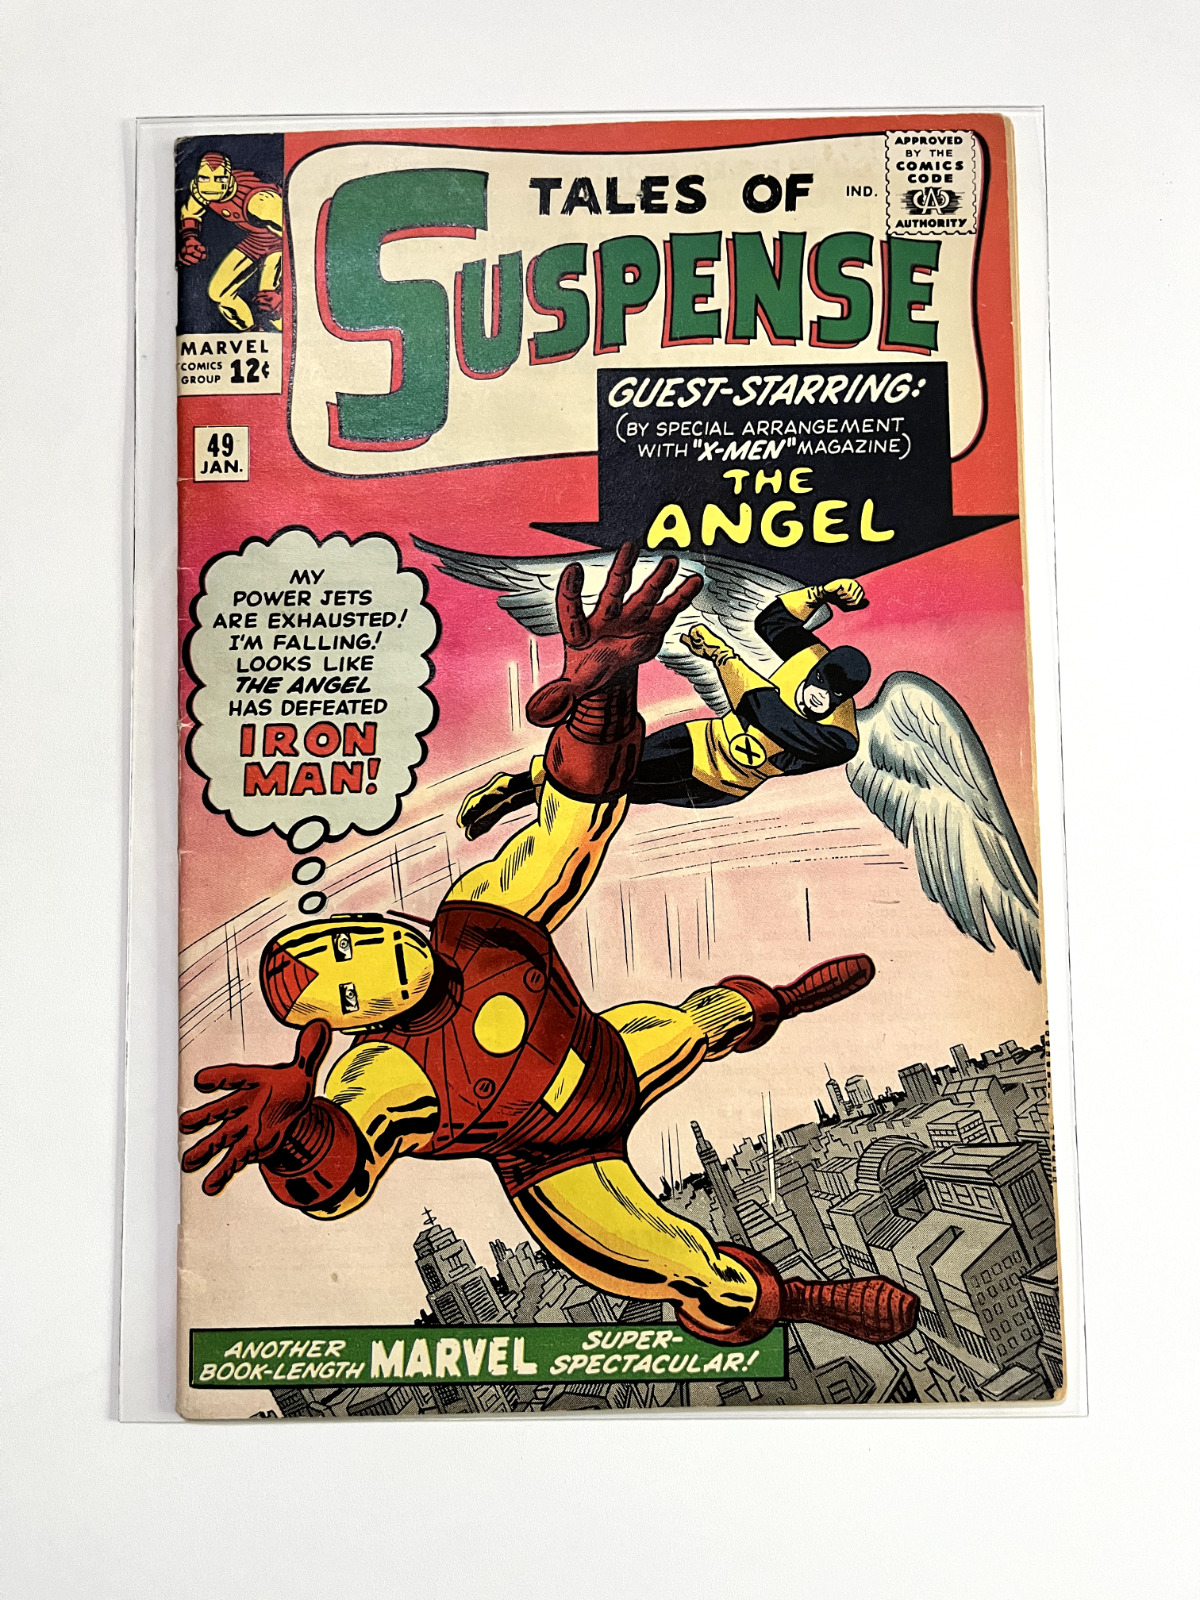 Tales of Suspense #49 (1964 Marvel Comics) First X-Men Crossover Issue [FN/FN-]